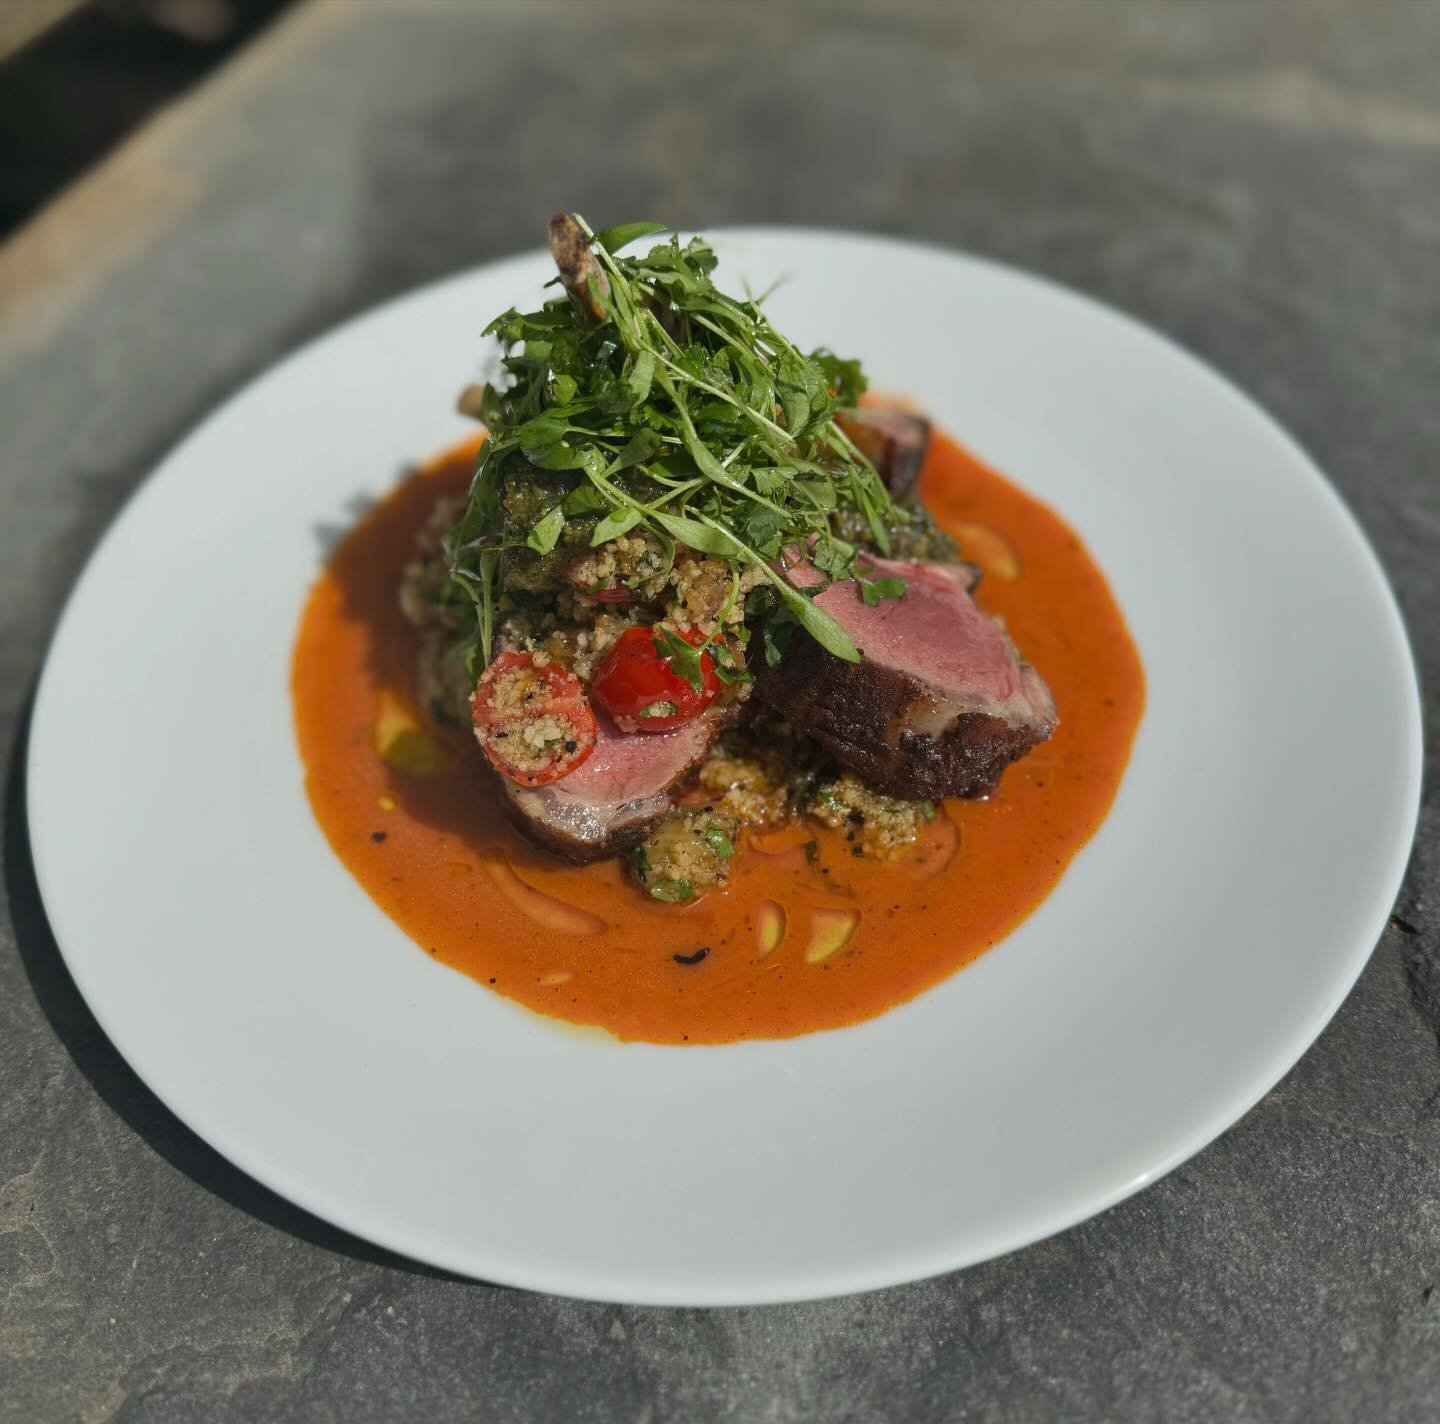 Urfa pepper roasted lamb rack, pistachio and mint pistou, grilled eggplant, warm couscous salad, and red pepper coulis.

This dish is the perfect thing to enjoy if you&rsquo;re ready for summer, perhaps on the back patio? Seating available when weath